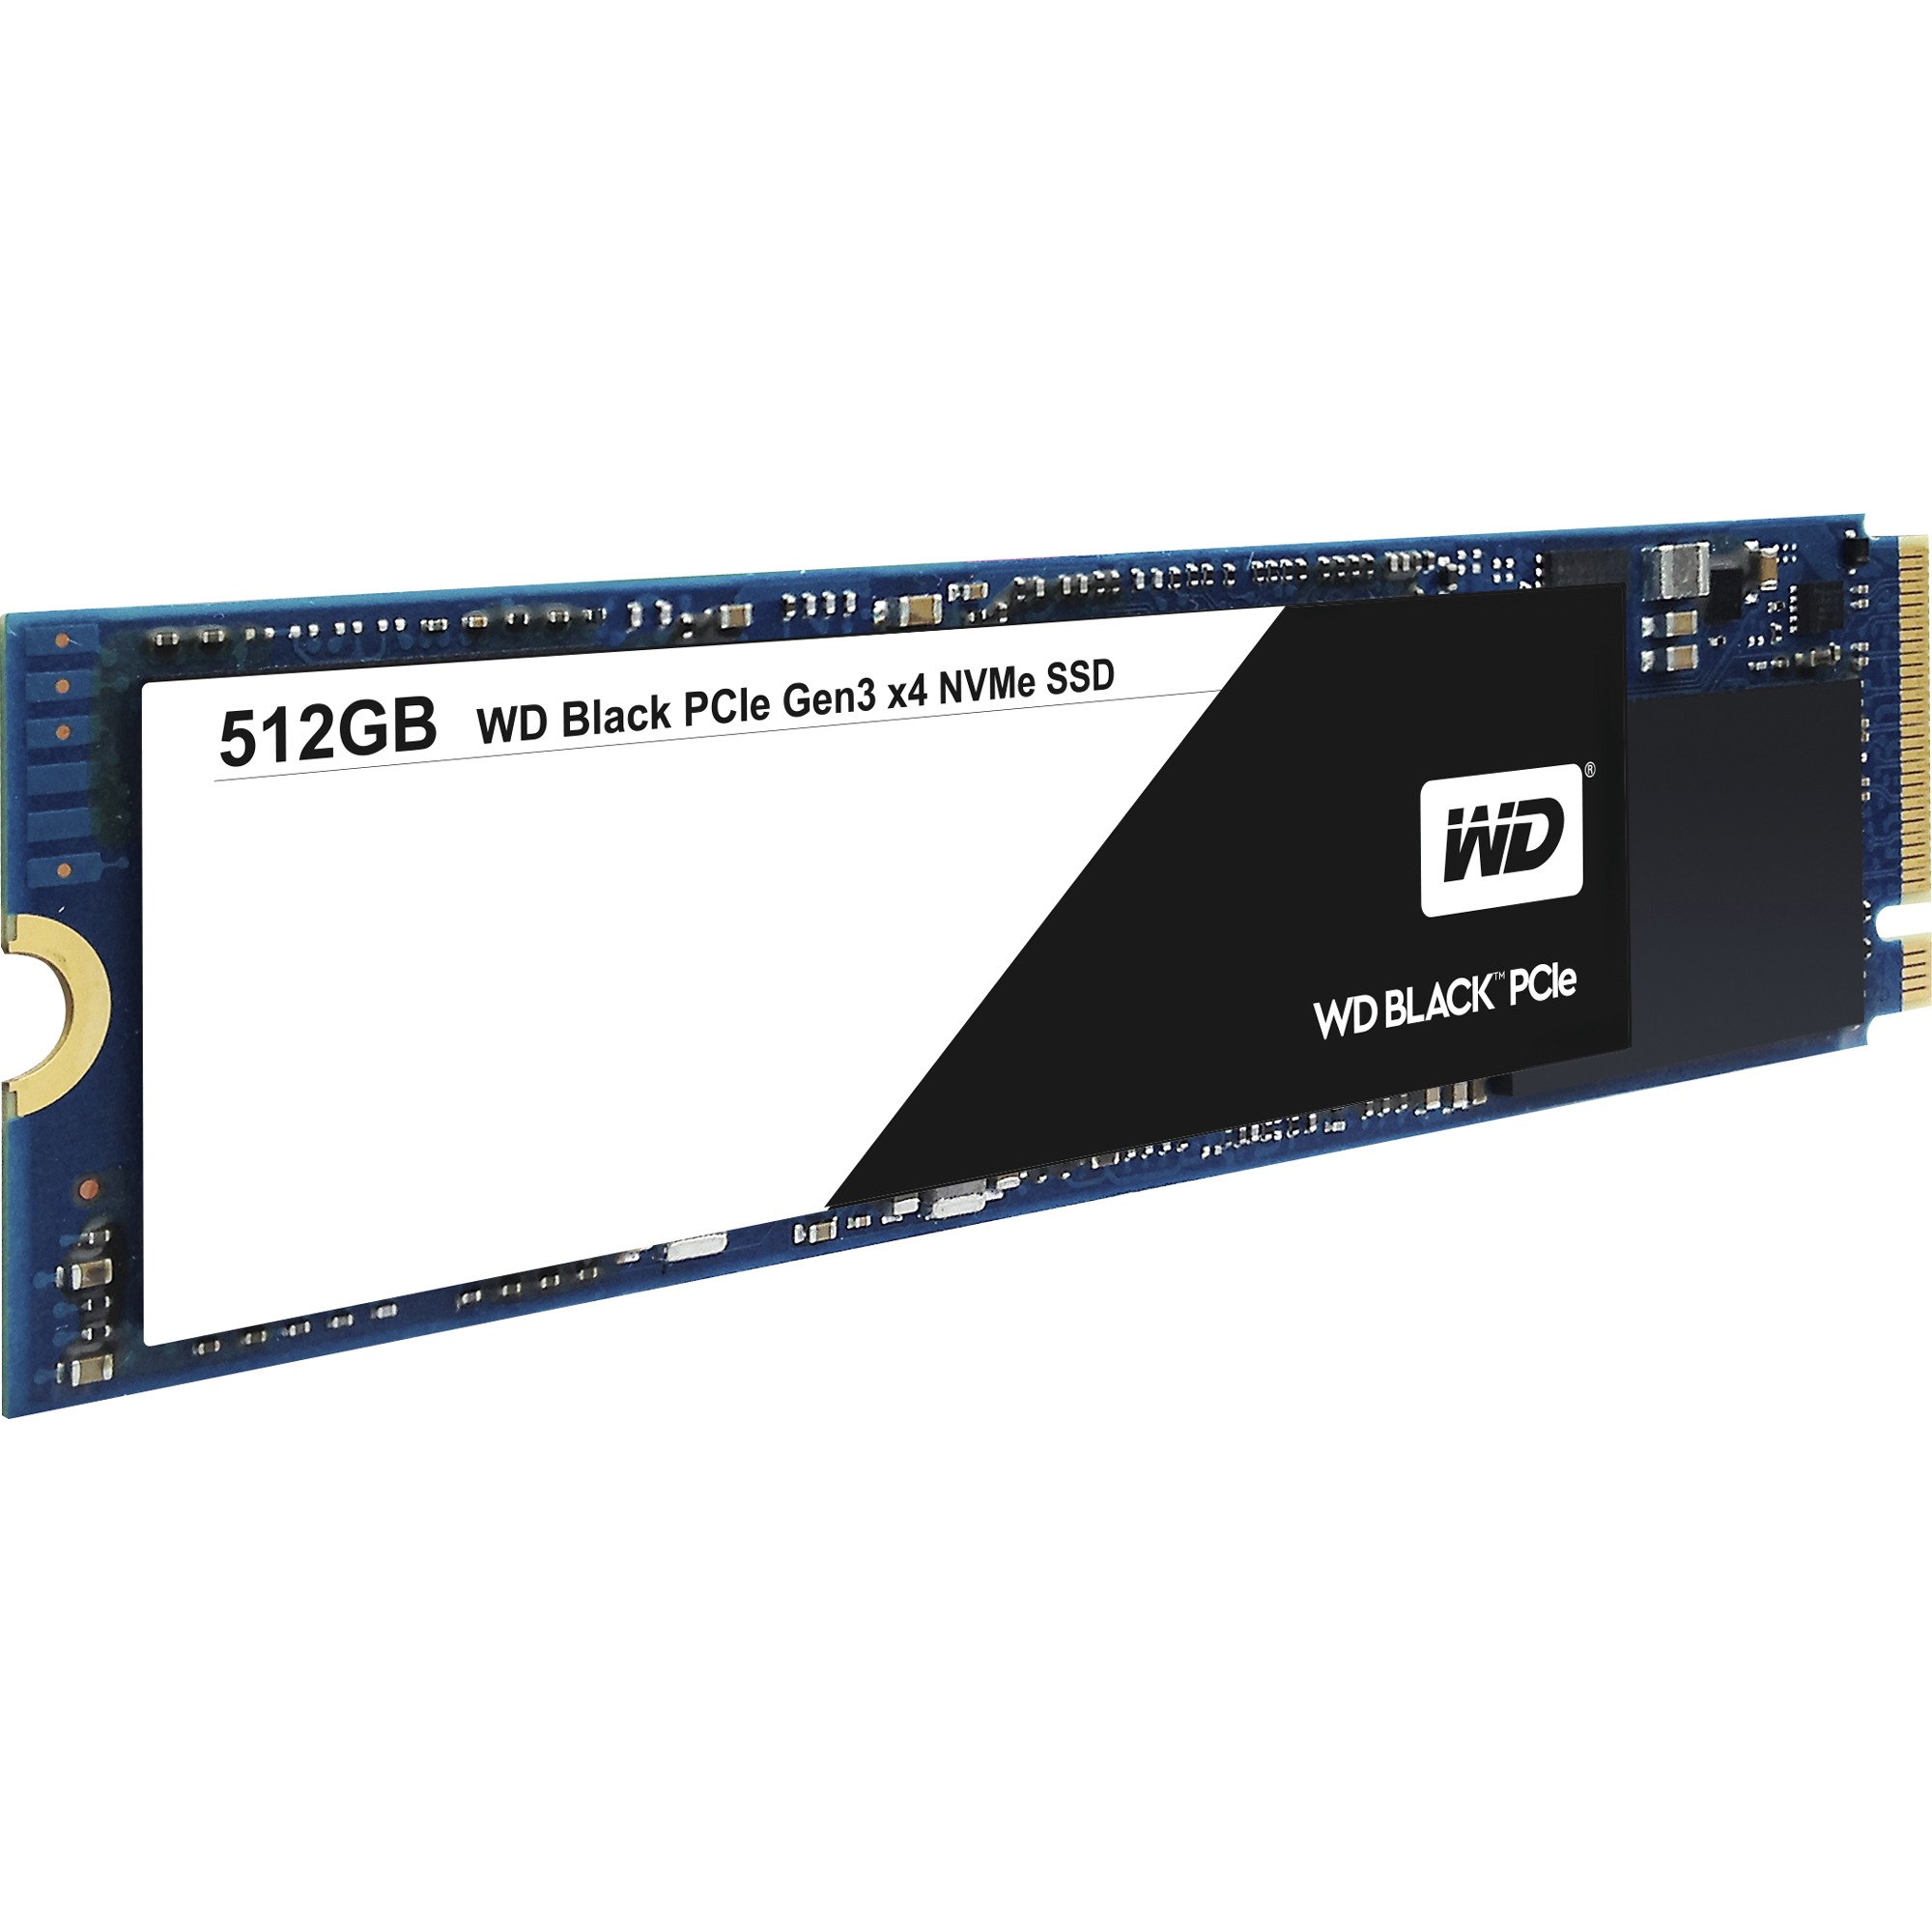 WD Black 512GB Performance SSD - 8 Gb/s M.2 2280 PCIe NVMe Solid State Drive - WDS512G1X0C 0